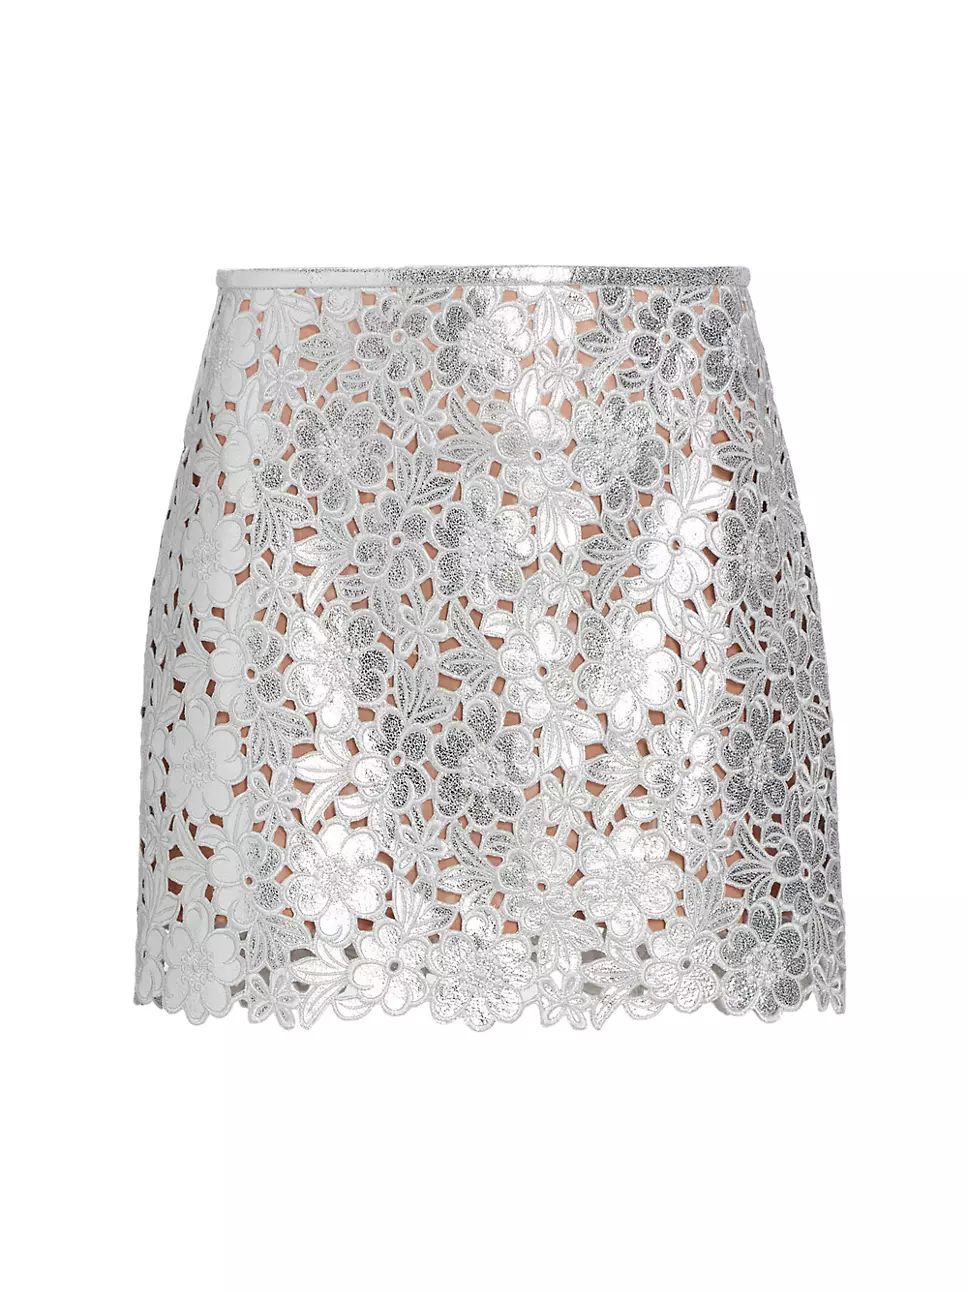 Floral Cut-Out Metallic Leather Miniskirt | Saks Fifth Avenue